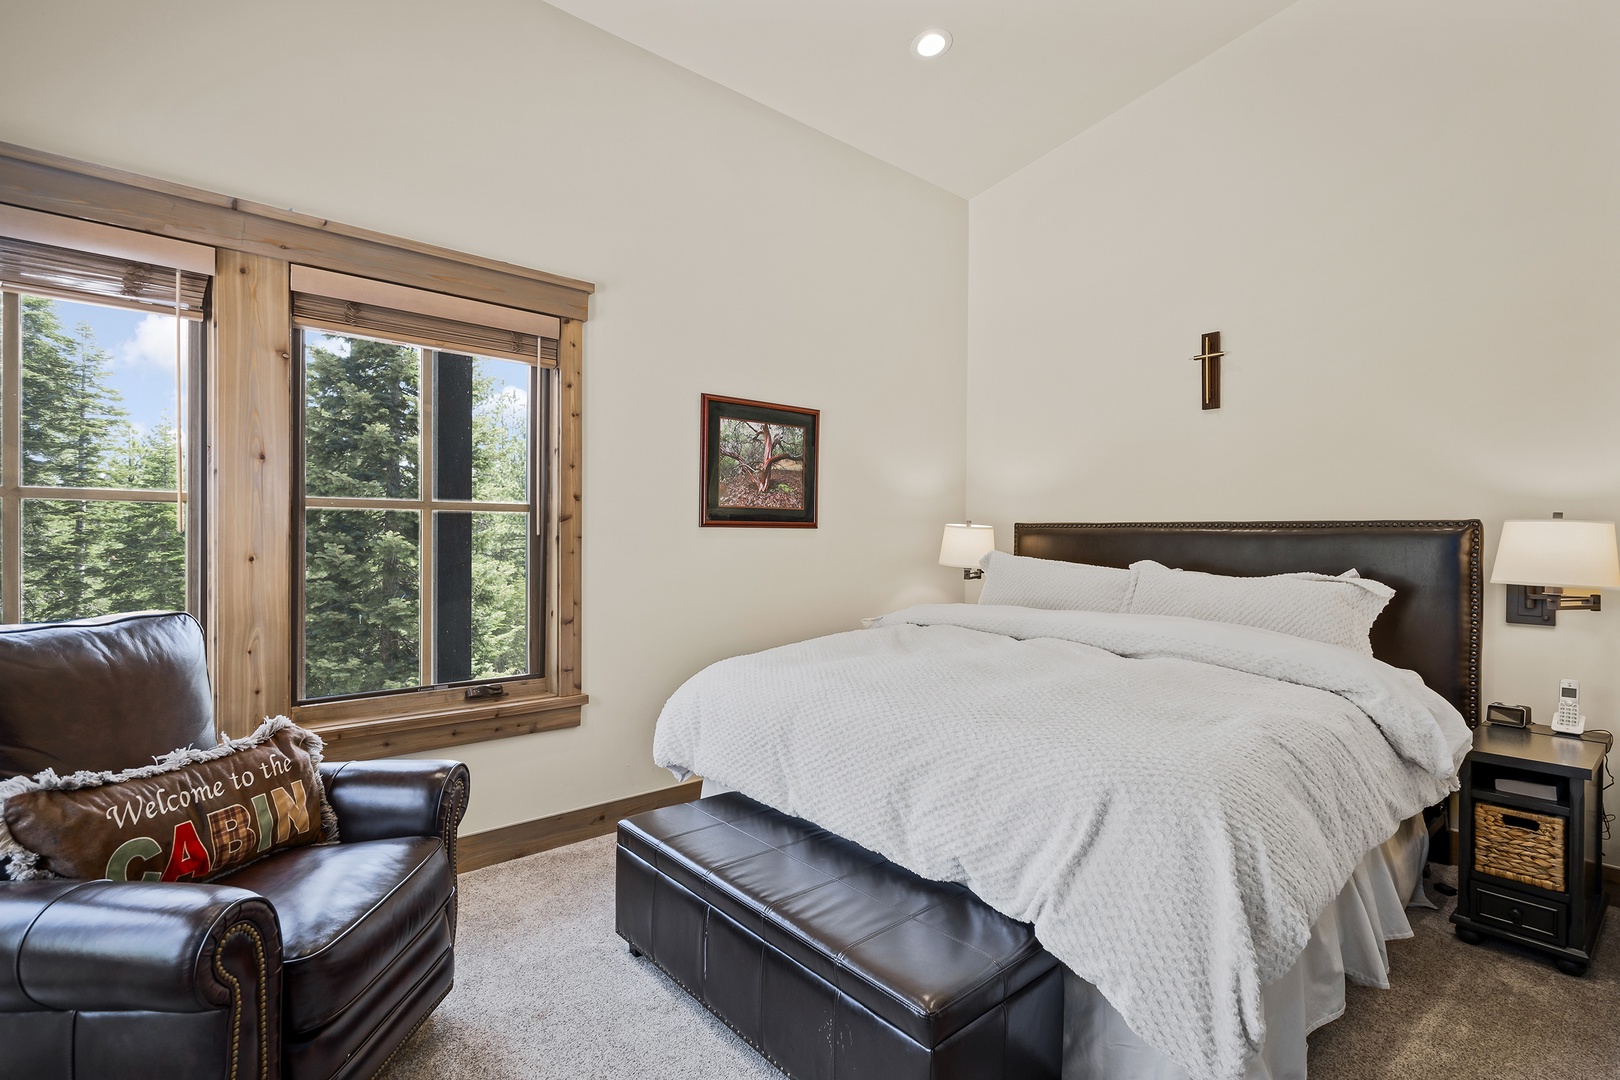 guest bedroom features a king-size bed